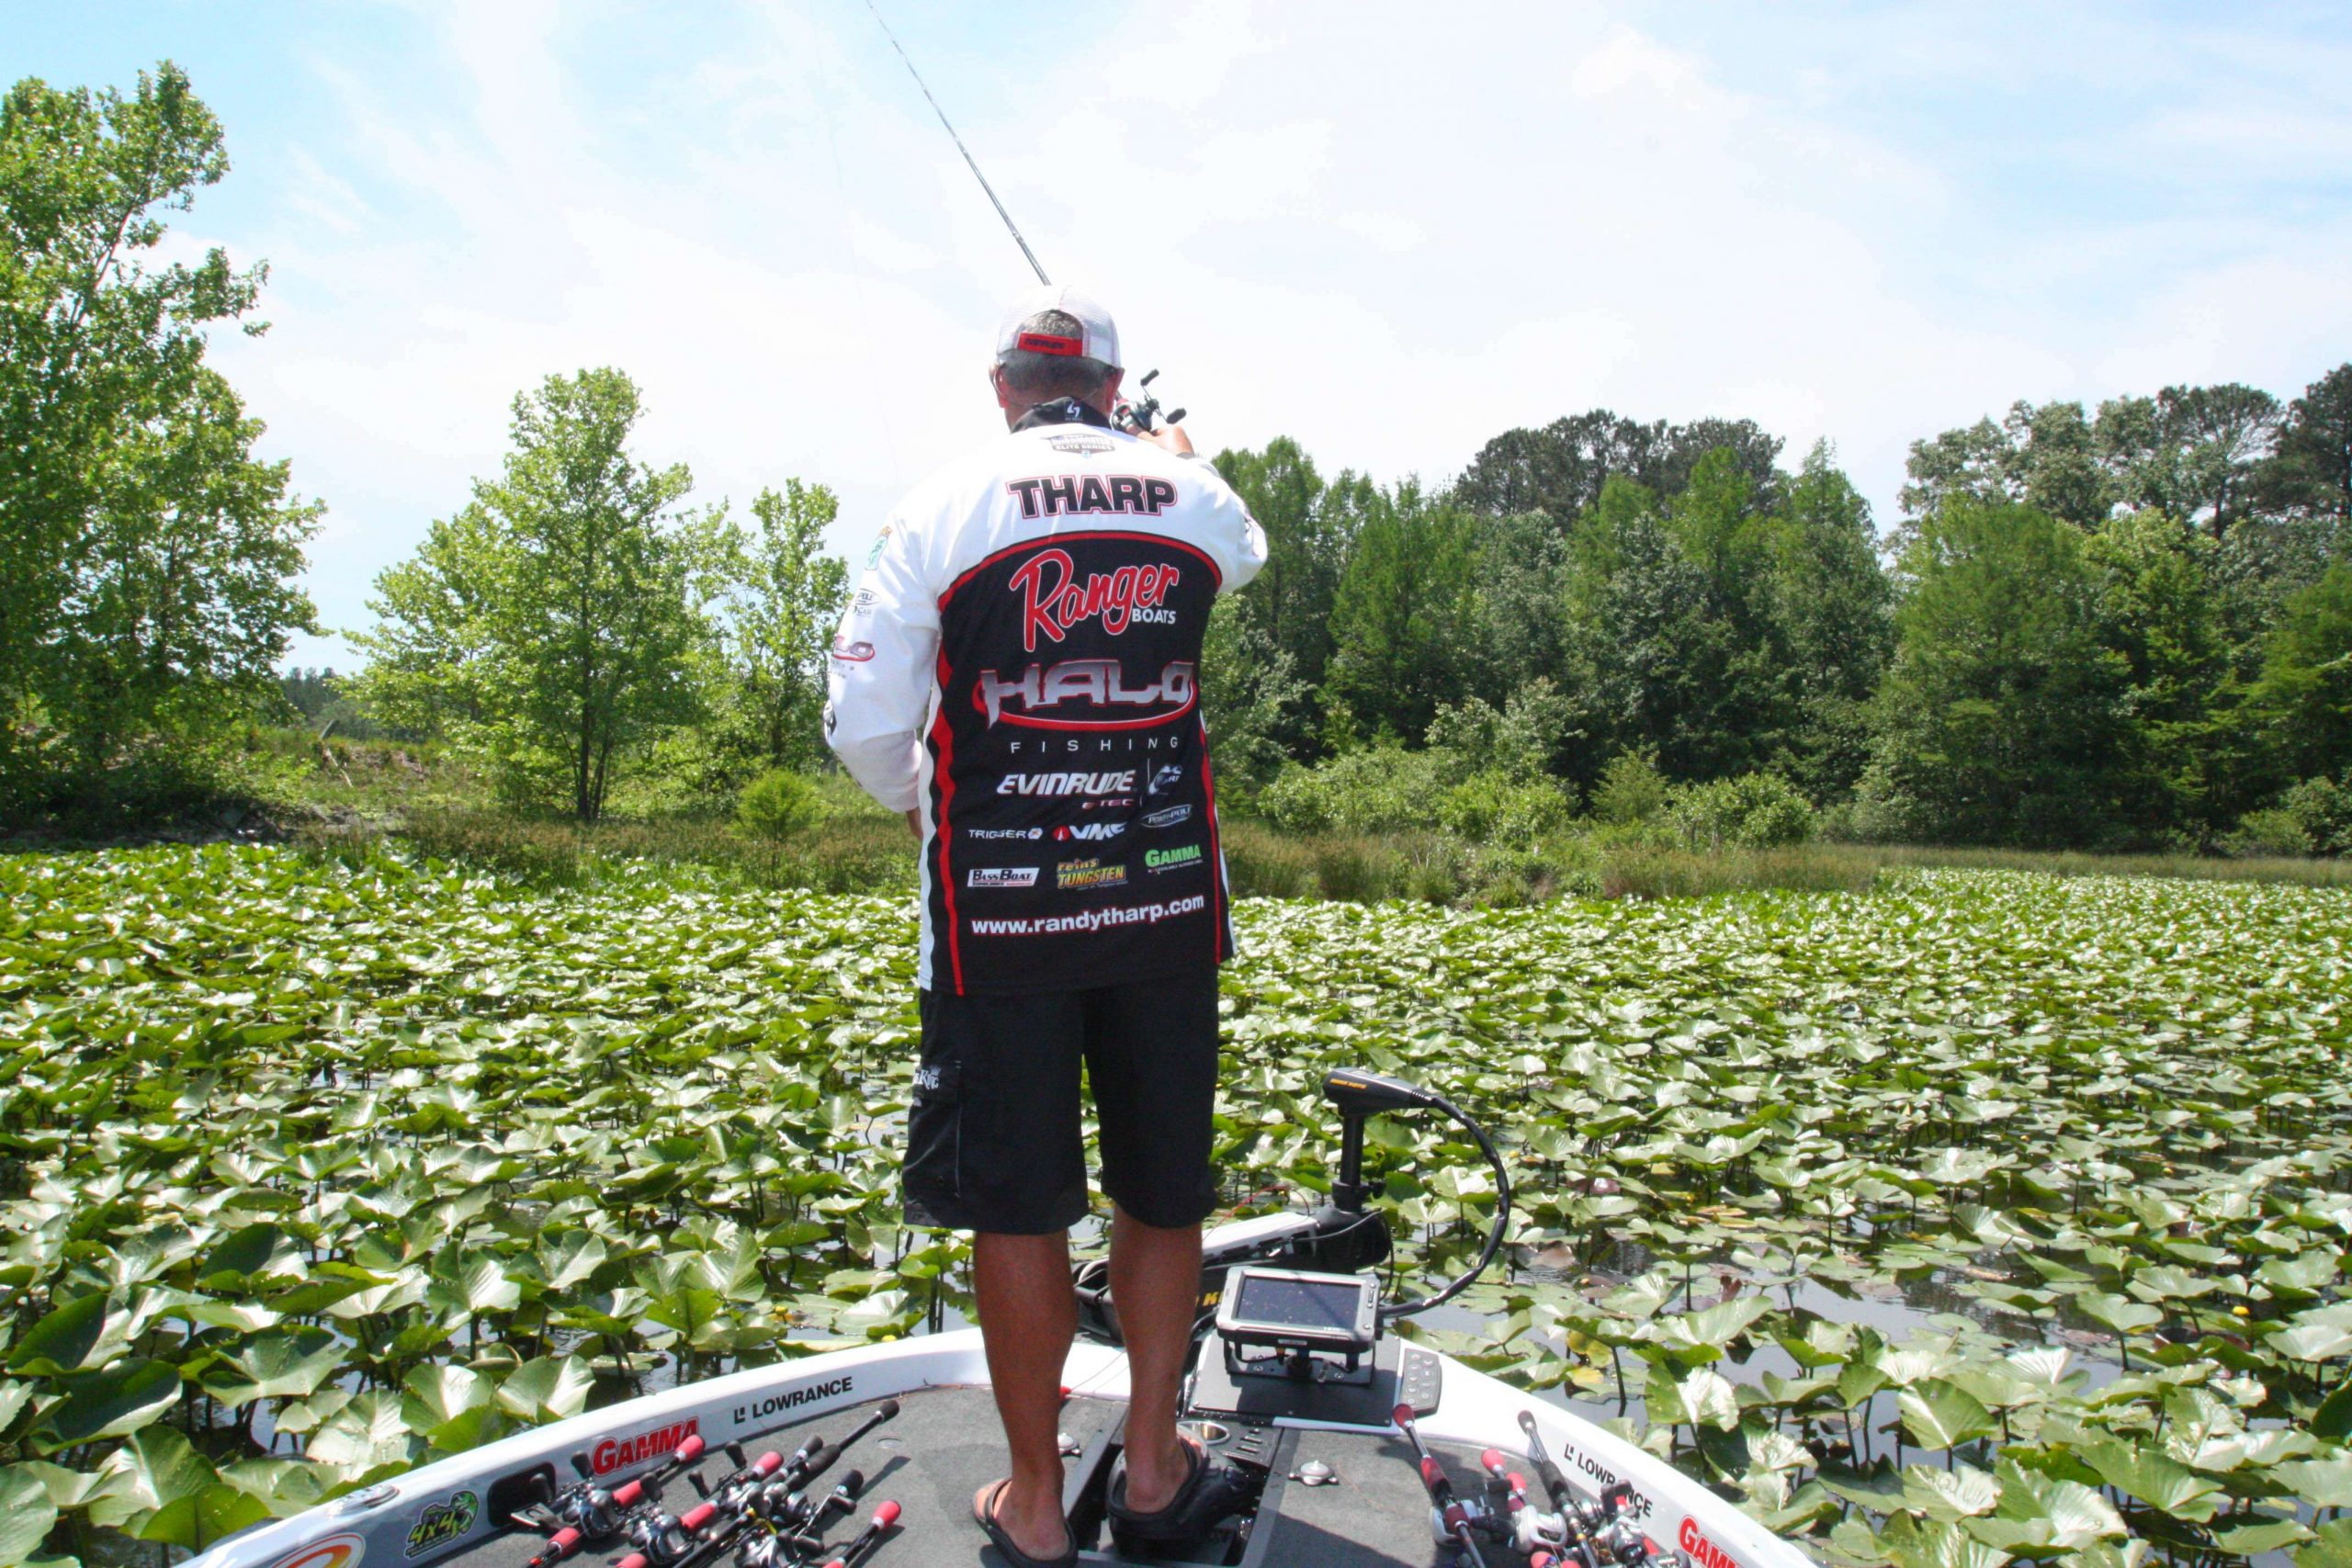 Tharp caught his biggest bass of the day while using a punch craw in thick pad cover.